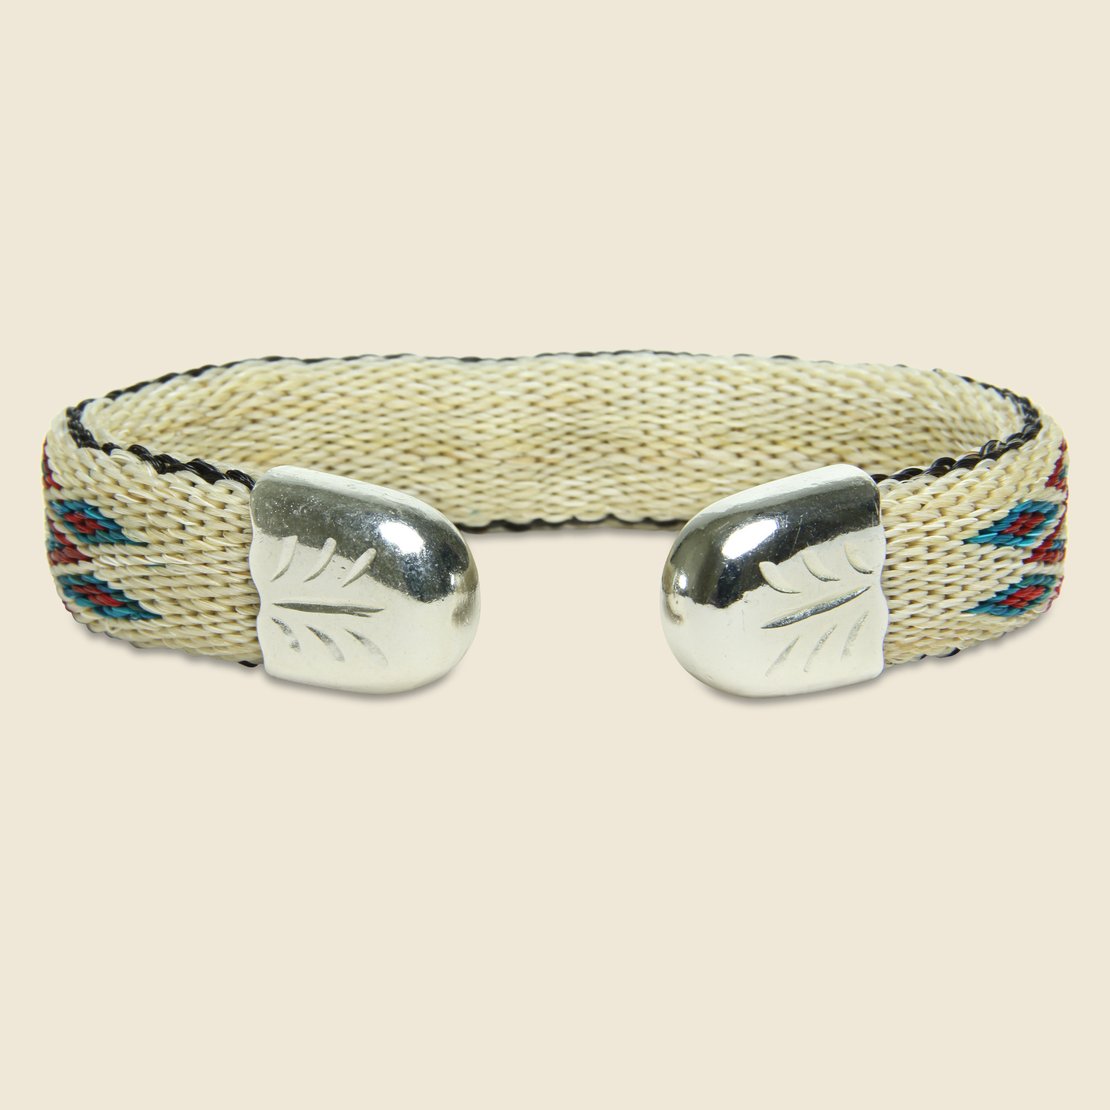 Bendable Horsehair Bracelet - Ivory/Turquoise/Red